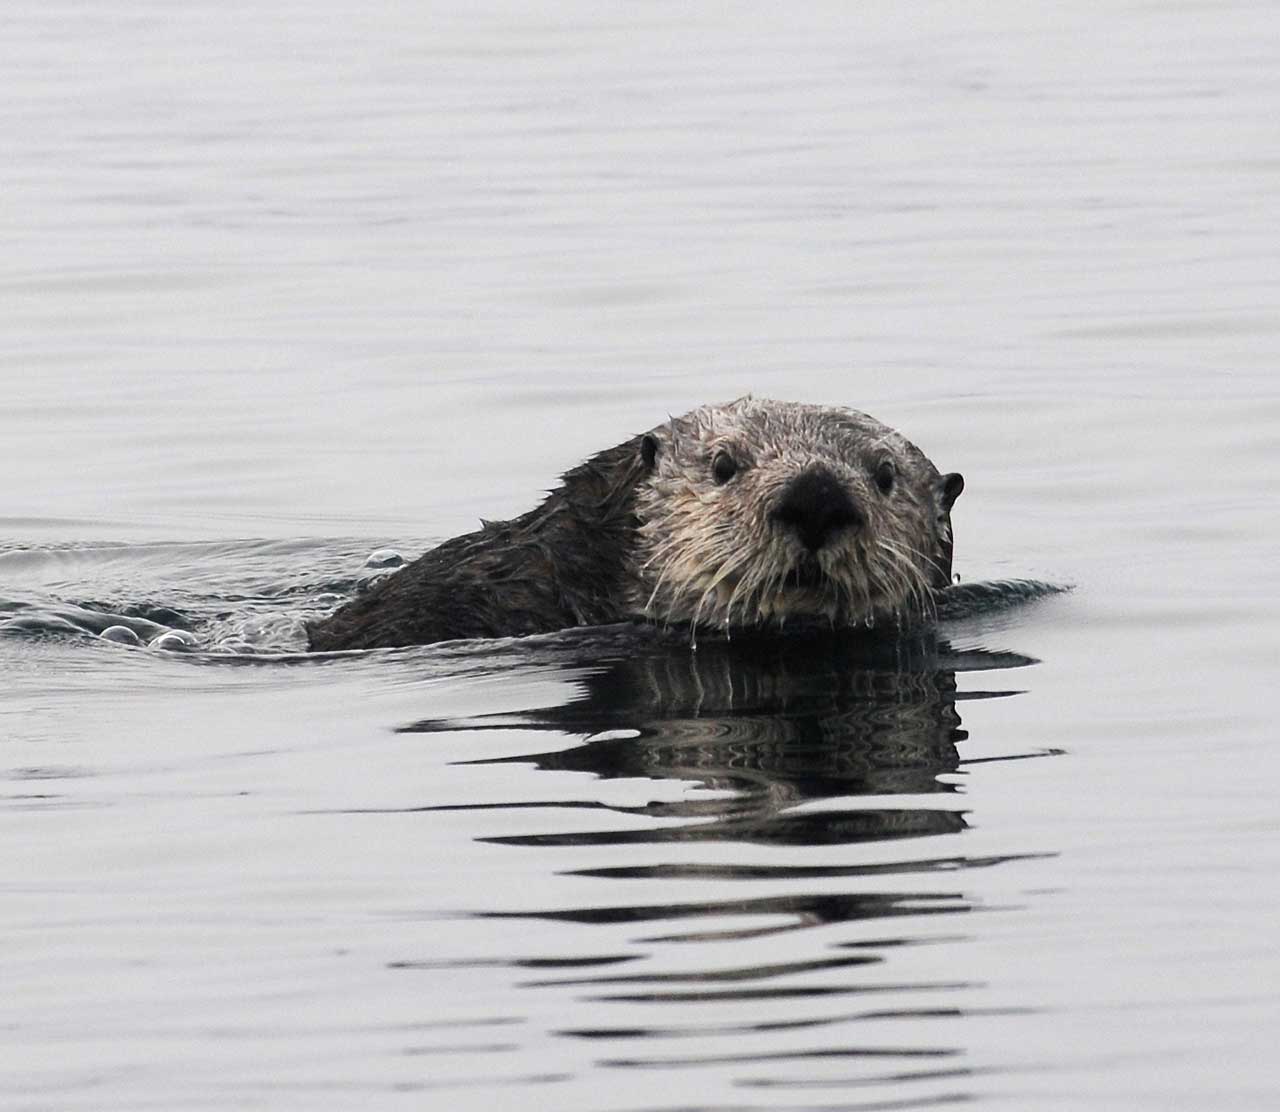 mers marine education research society happy otter in water